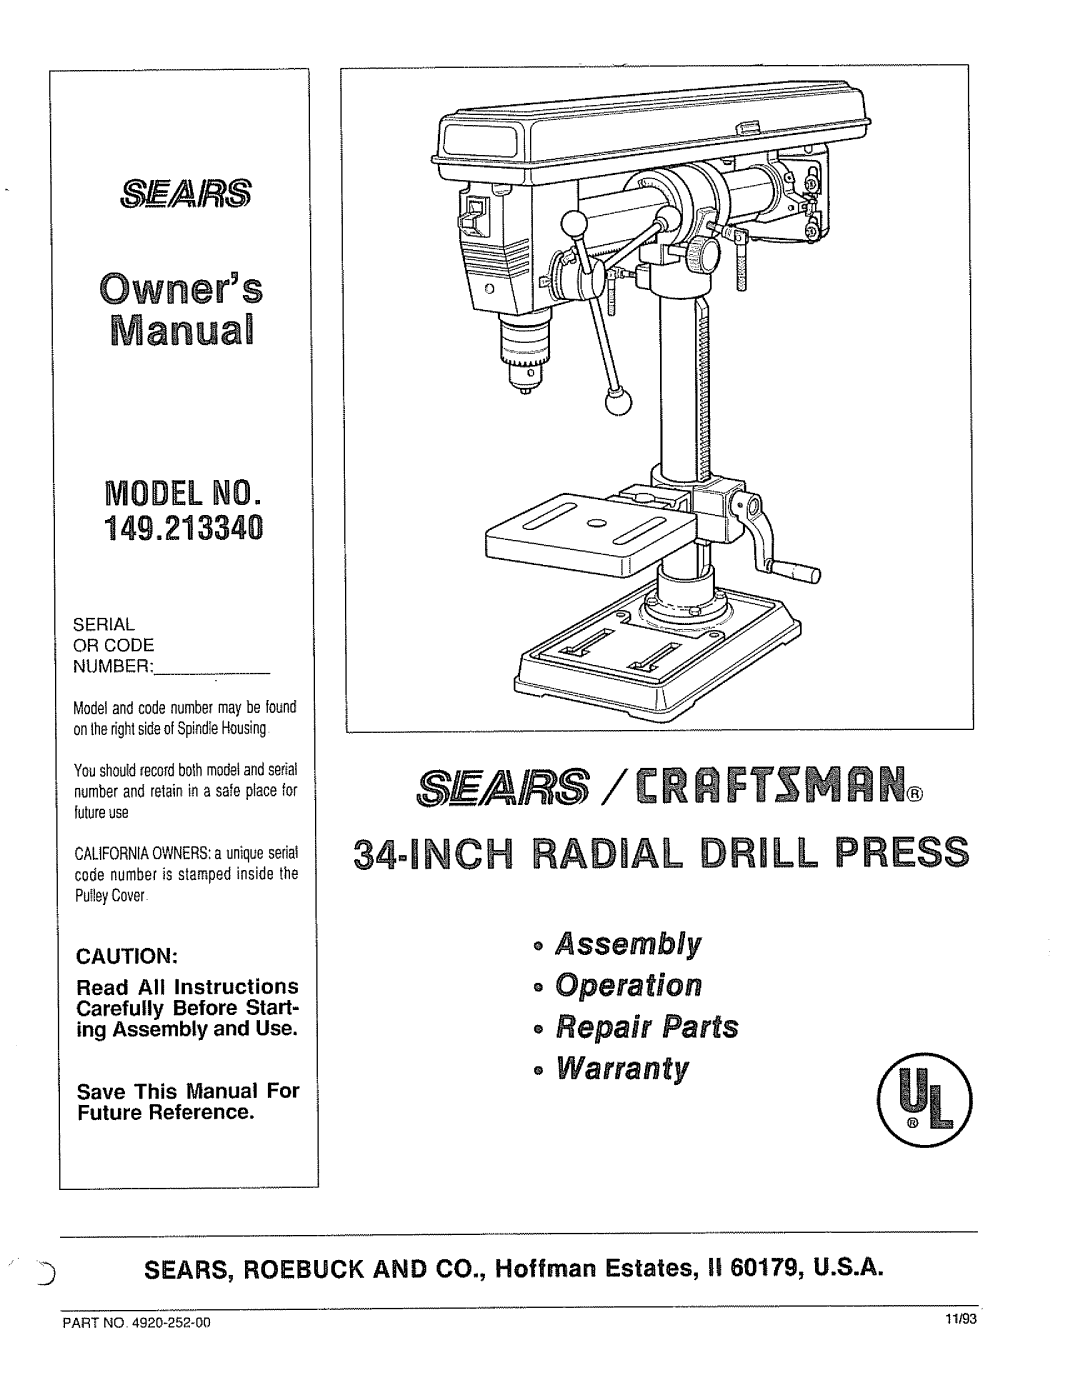 Sears 149.213340 warranty SEARS, ROEBUCK AND CO., Hoffman Estates, la 60179, U.S.A, Save This Manual For Future Reference 